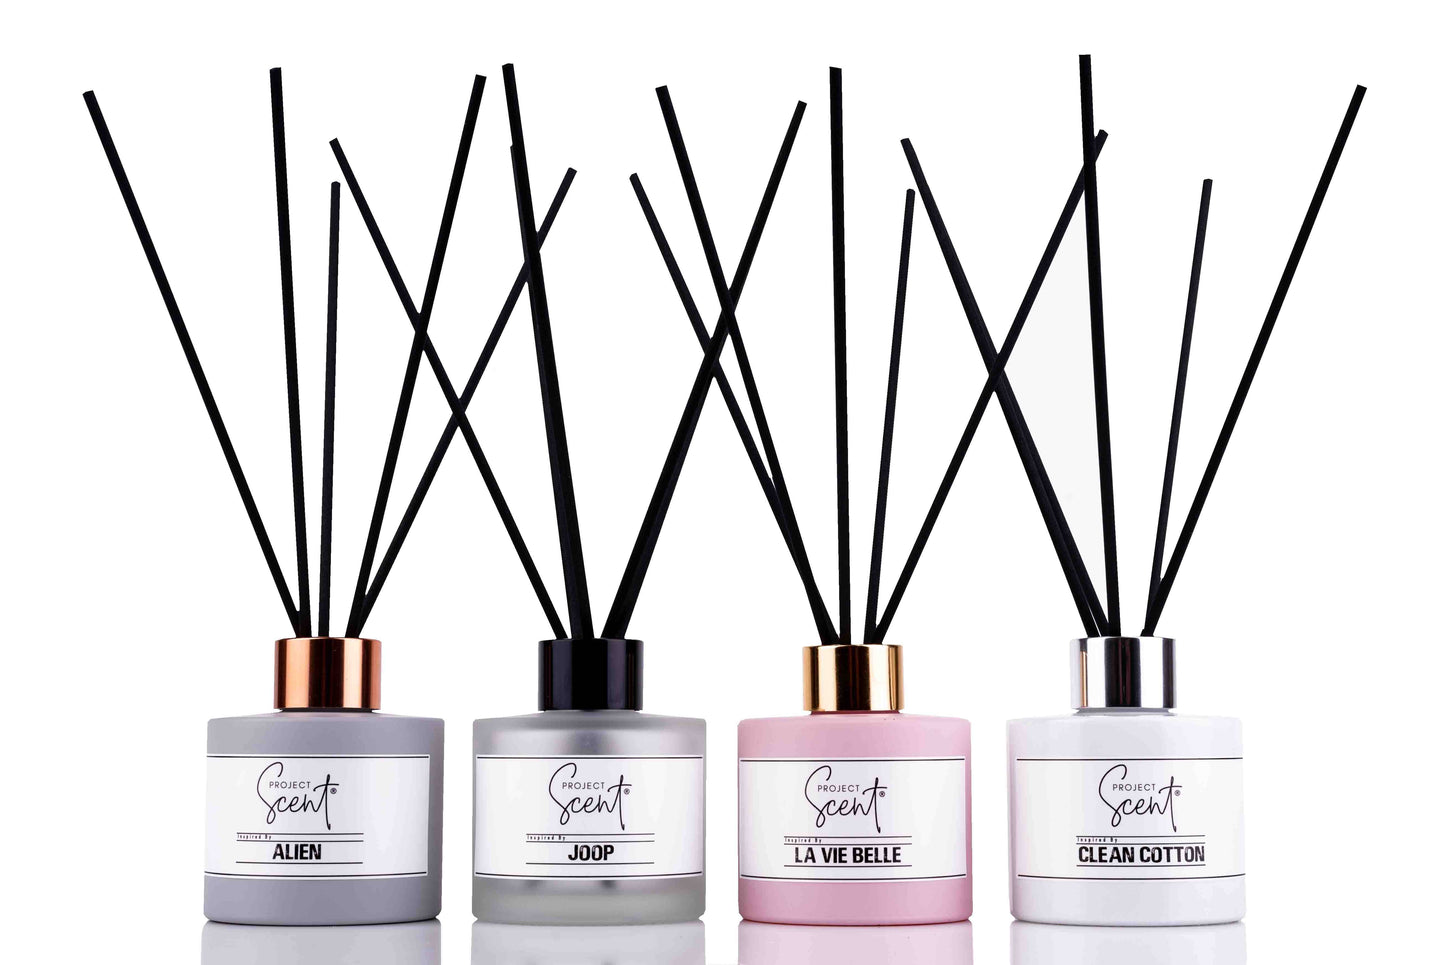 Project Scent Reed Diffuser 100ml